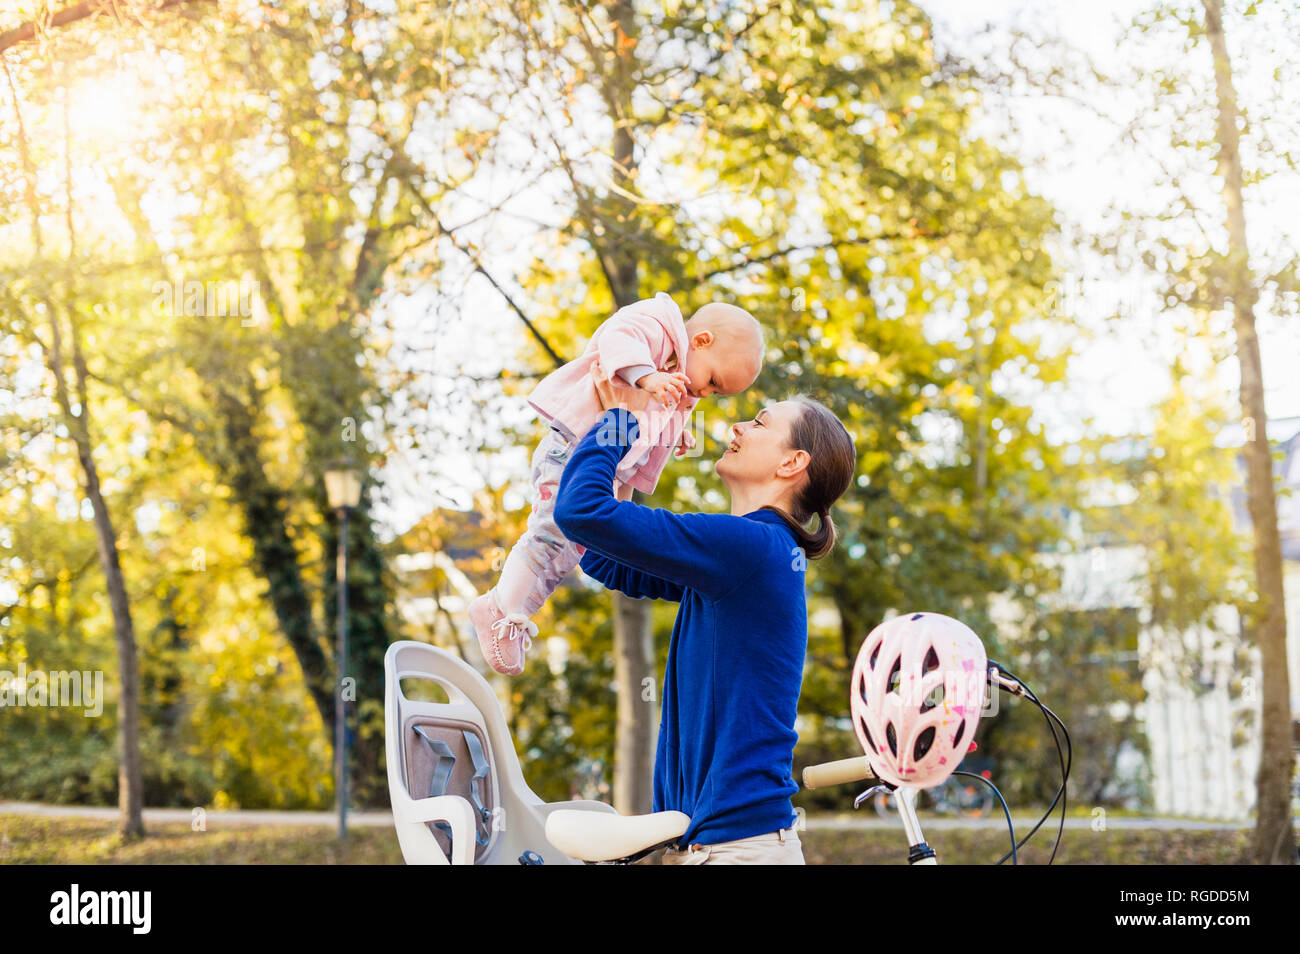 Mother and daughter riding bicycle, lifting baby  from children's seat Stock Photo